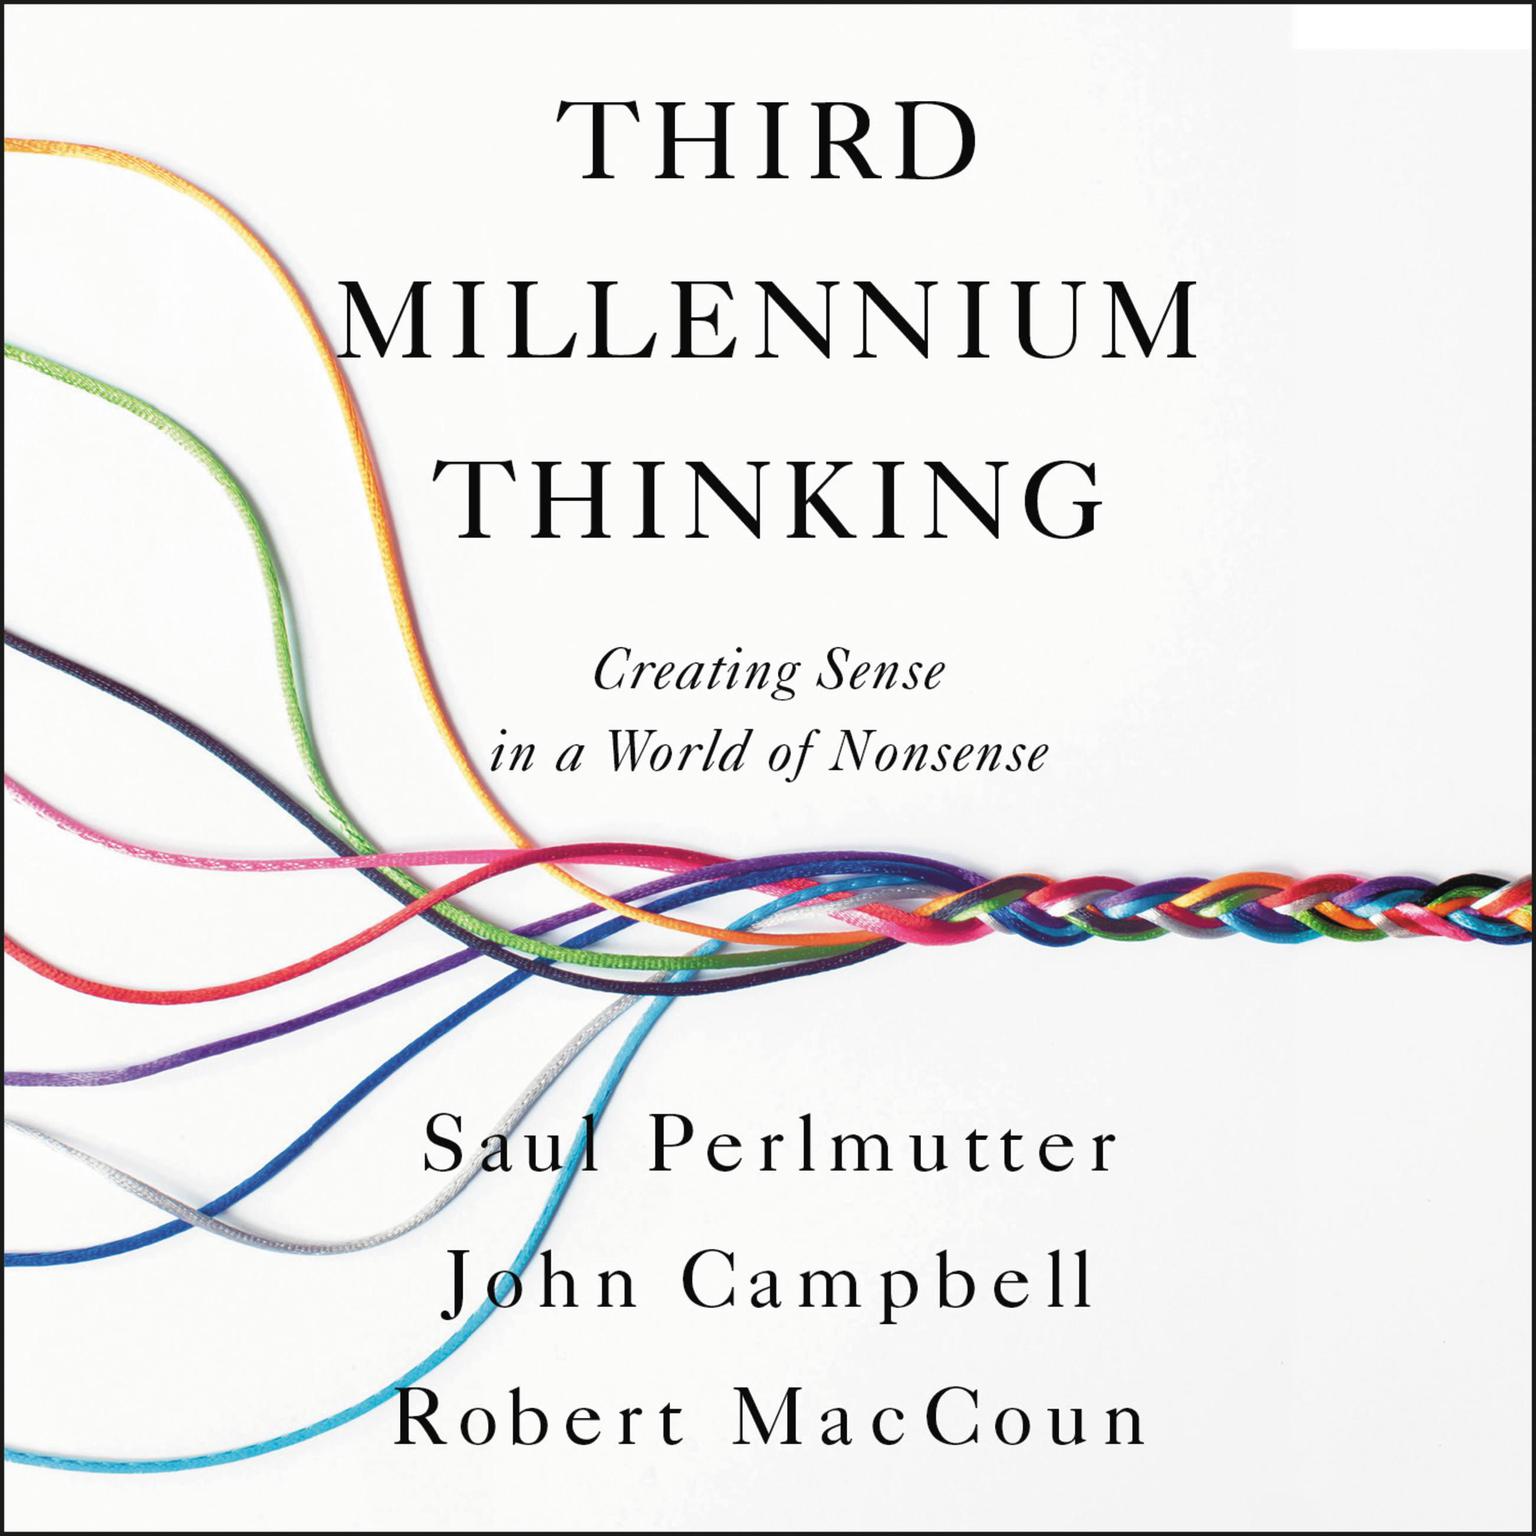 Third Millennium Thinking: Creating Sense in a World of Nonsense Audiobook, by John Campbell